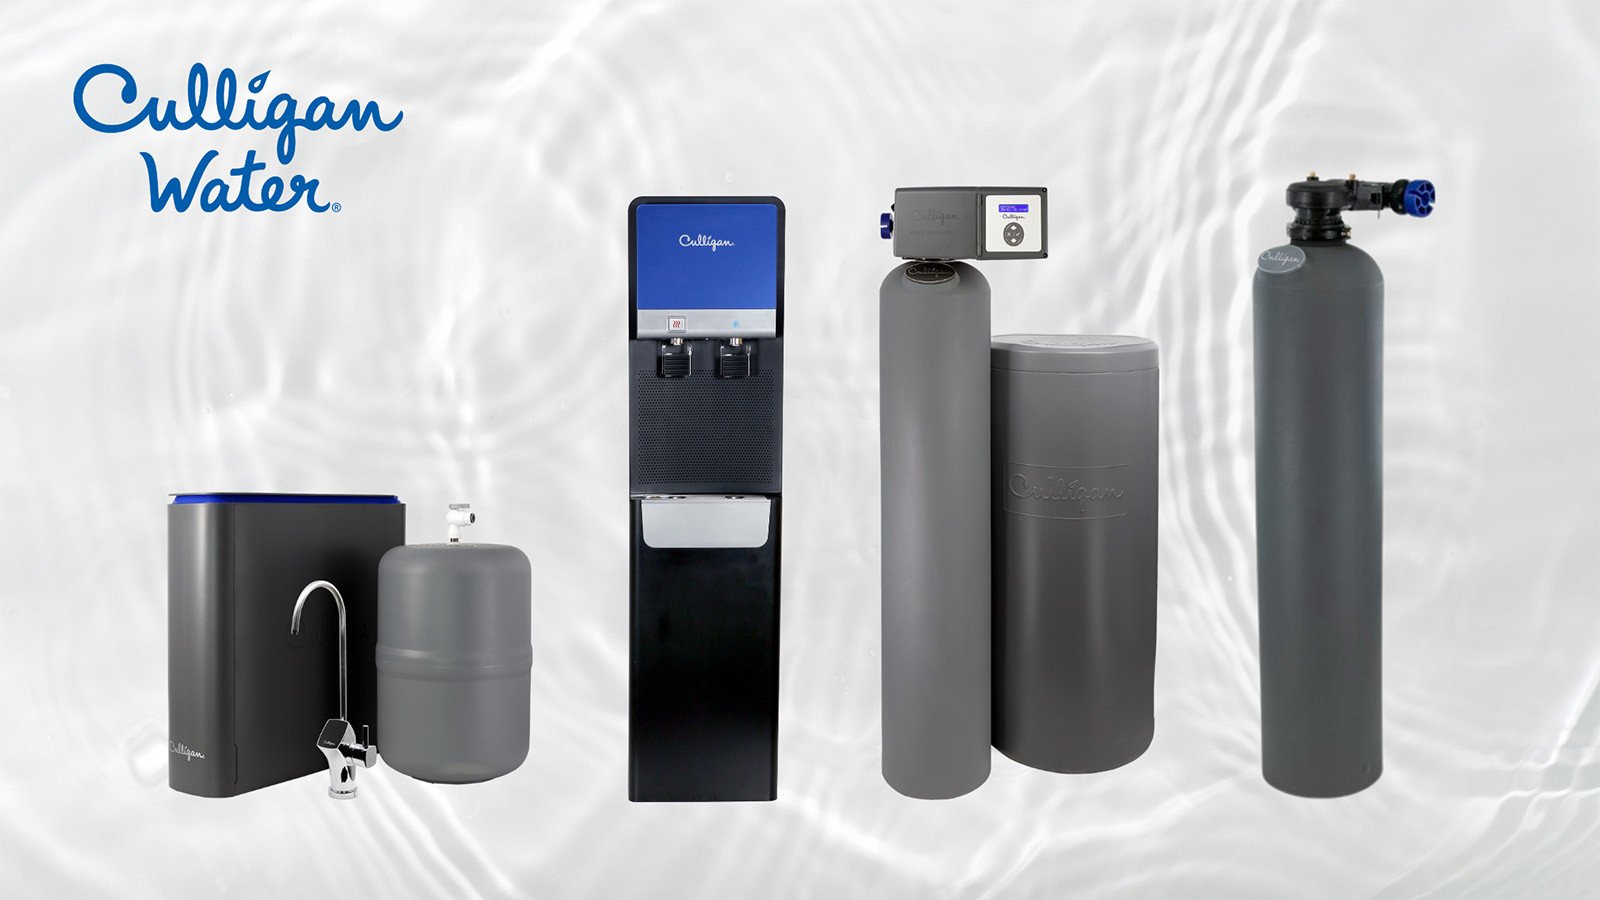 Lineup of Culligan products over a water droplet background